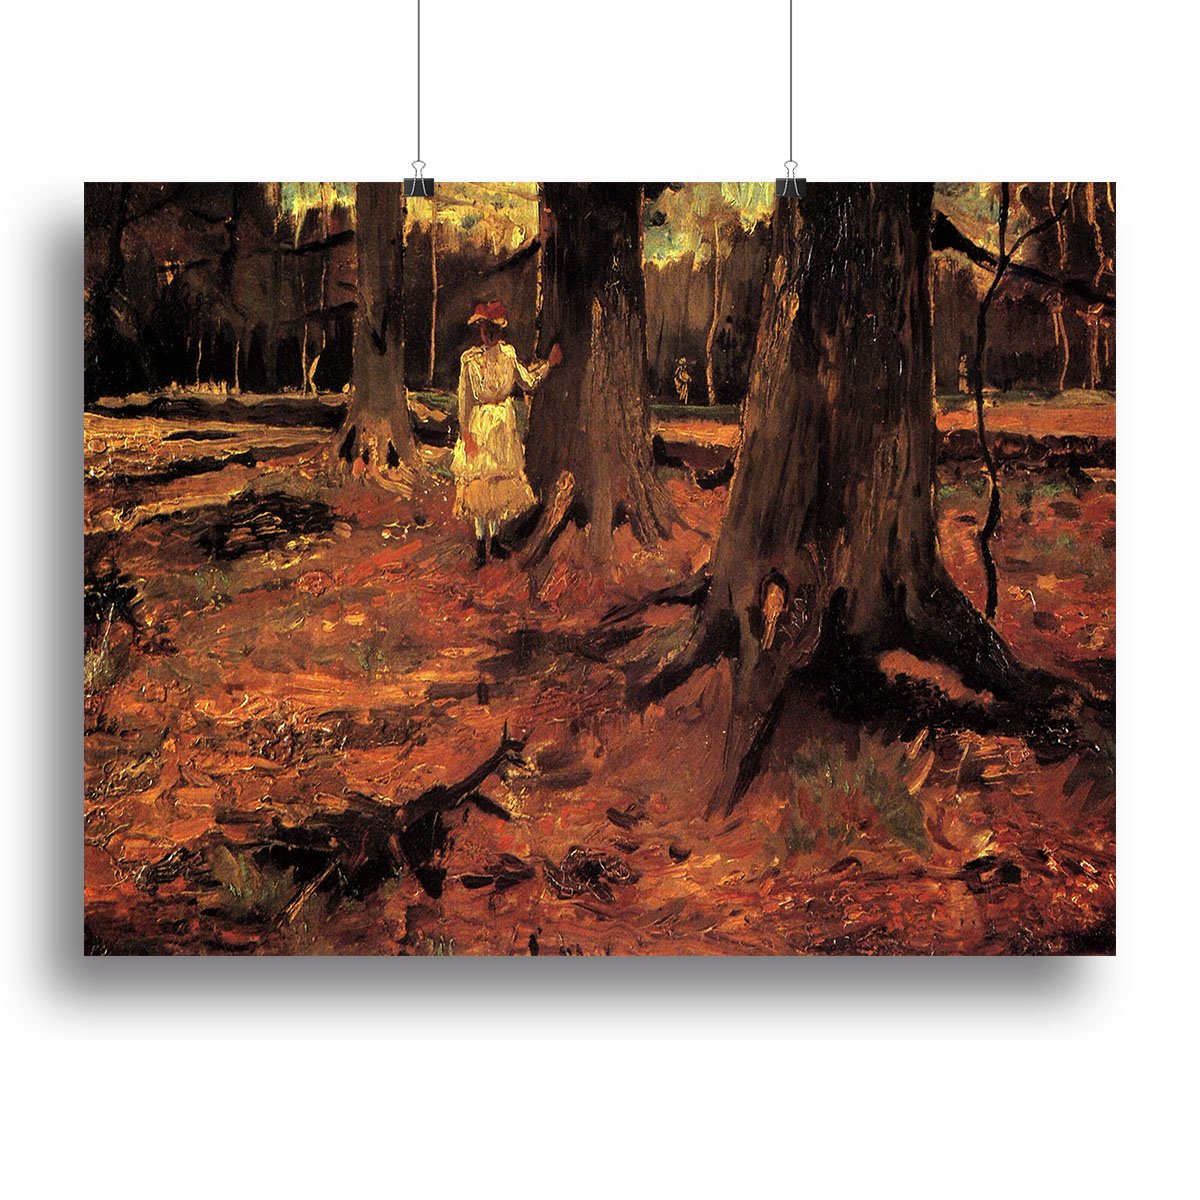 Girl in White in the Woods by Van Gogh Canvas Print or Poster